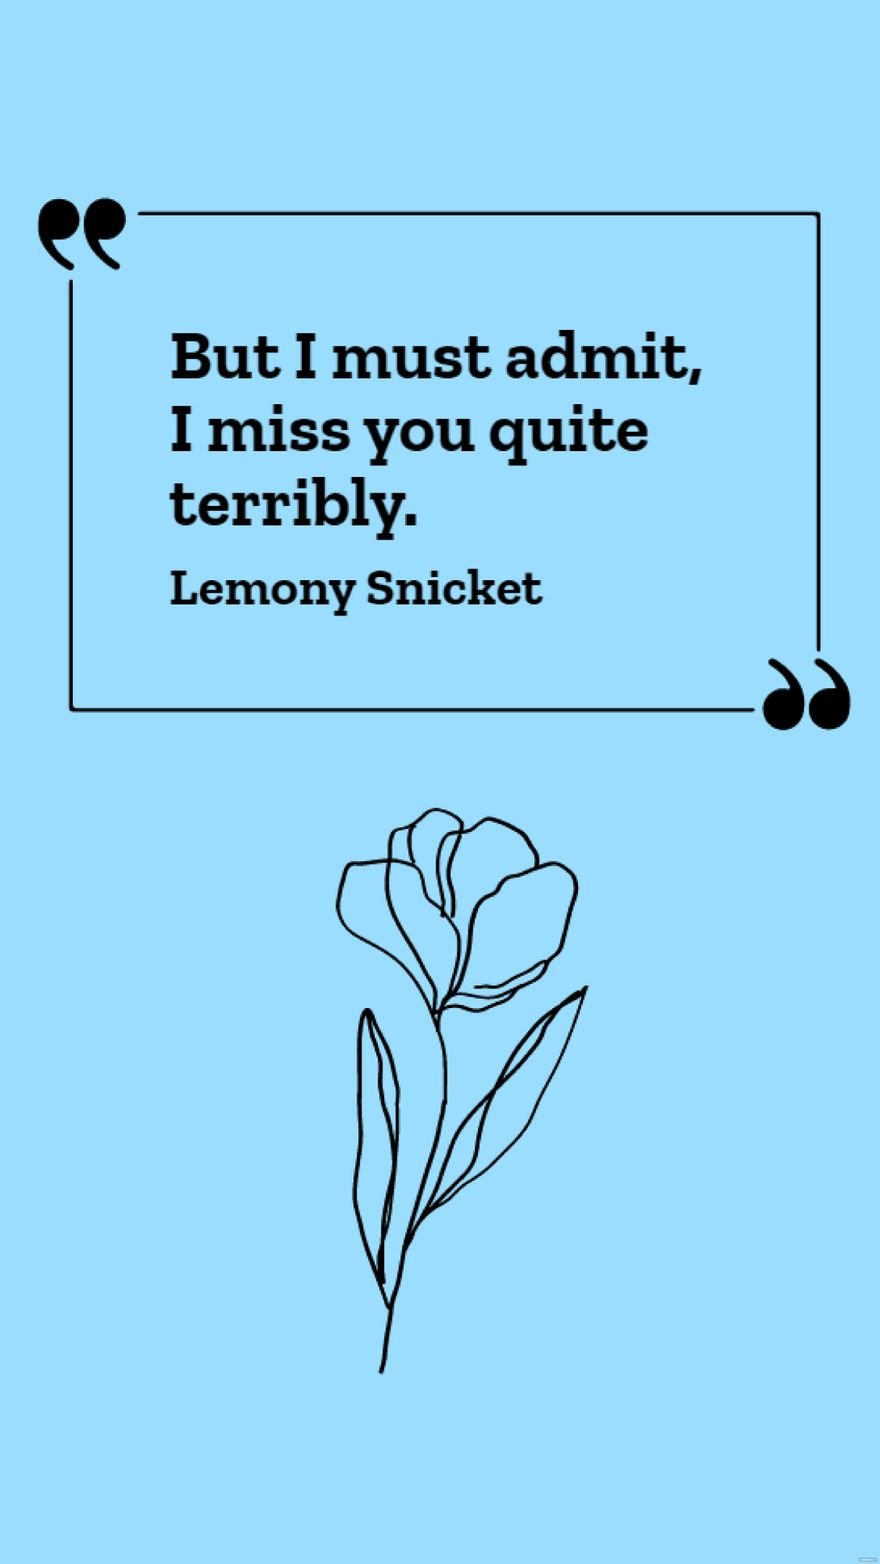 Lemony Snicket, The Beatrice Letters - But I must admit, I miss you quite terribly.